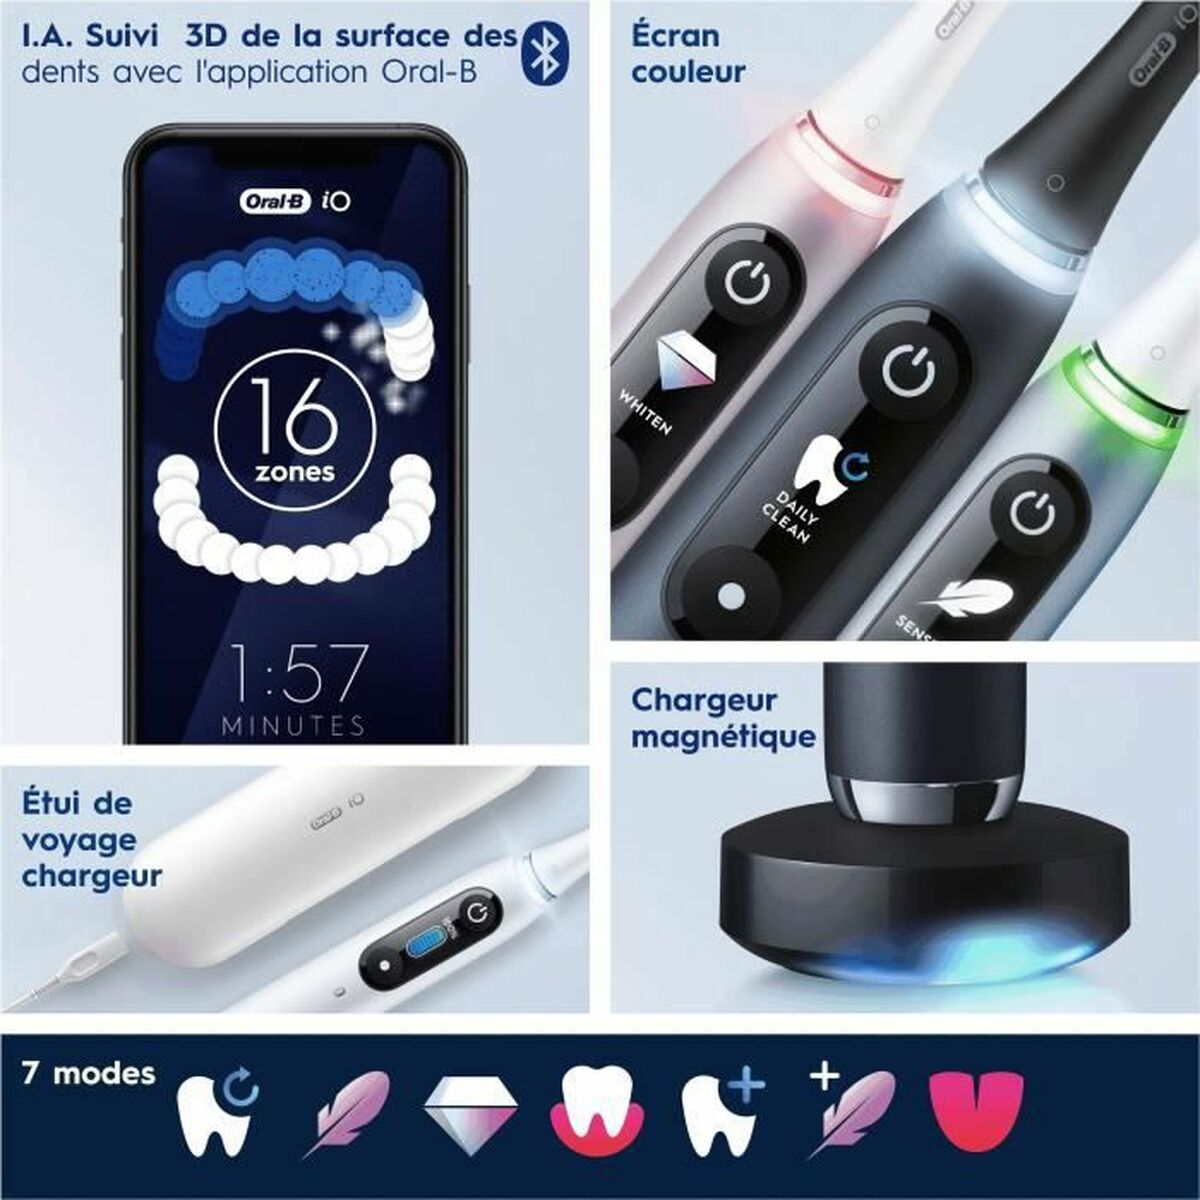 Electric Toothbrush Oral-B - Calm Beauty IE